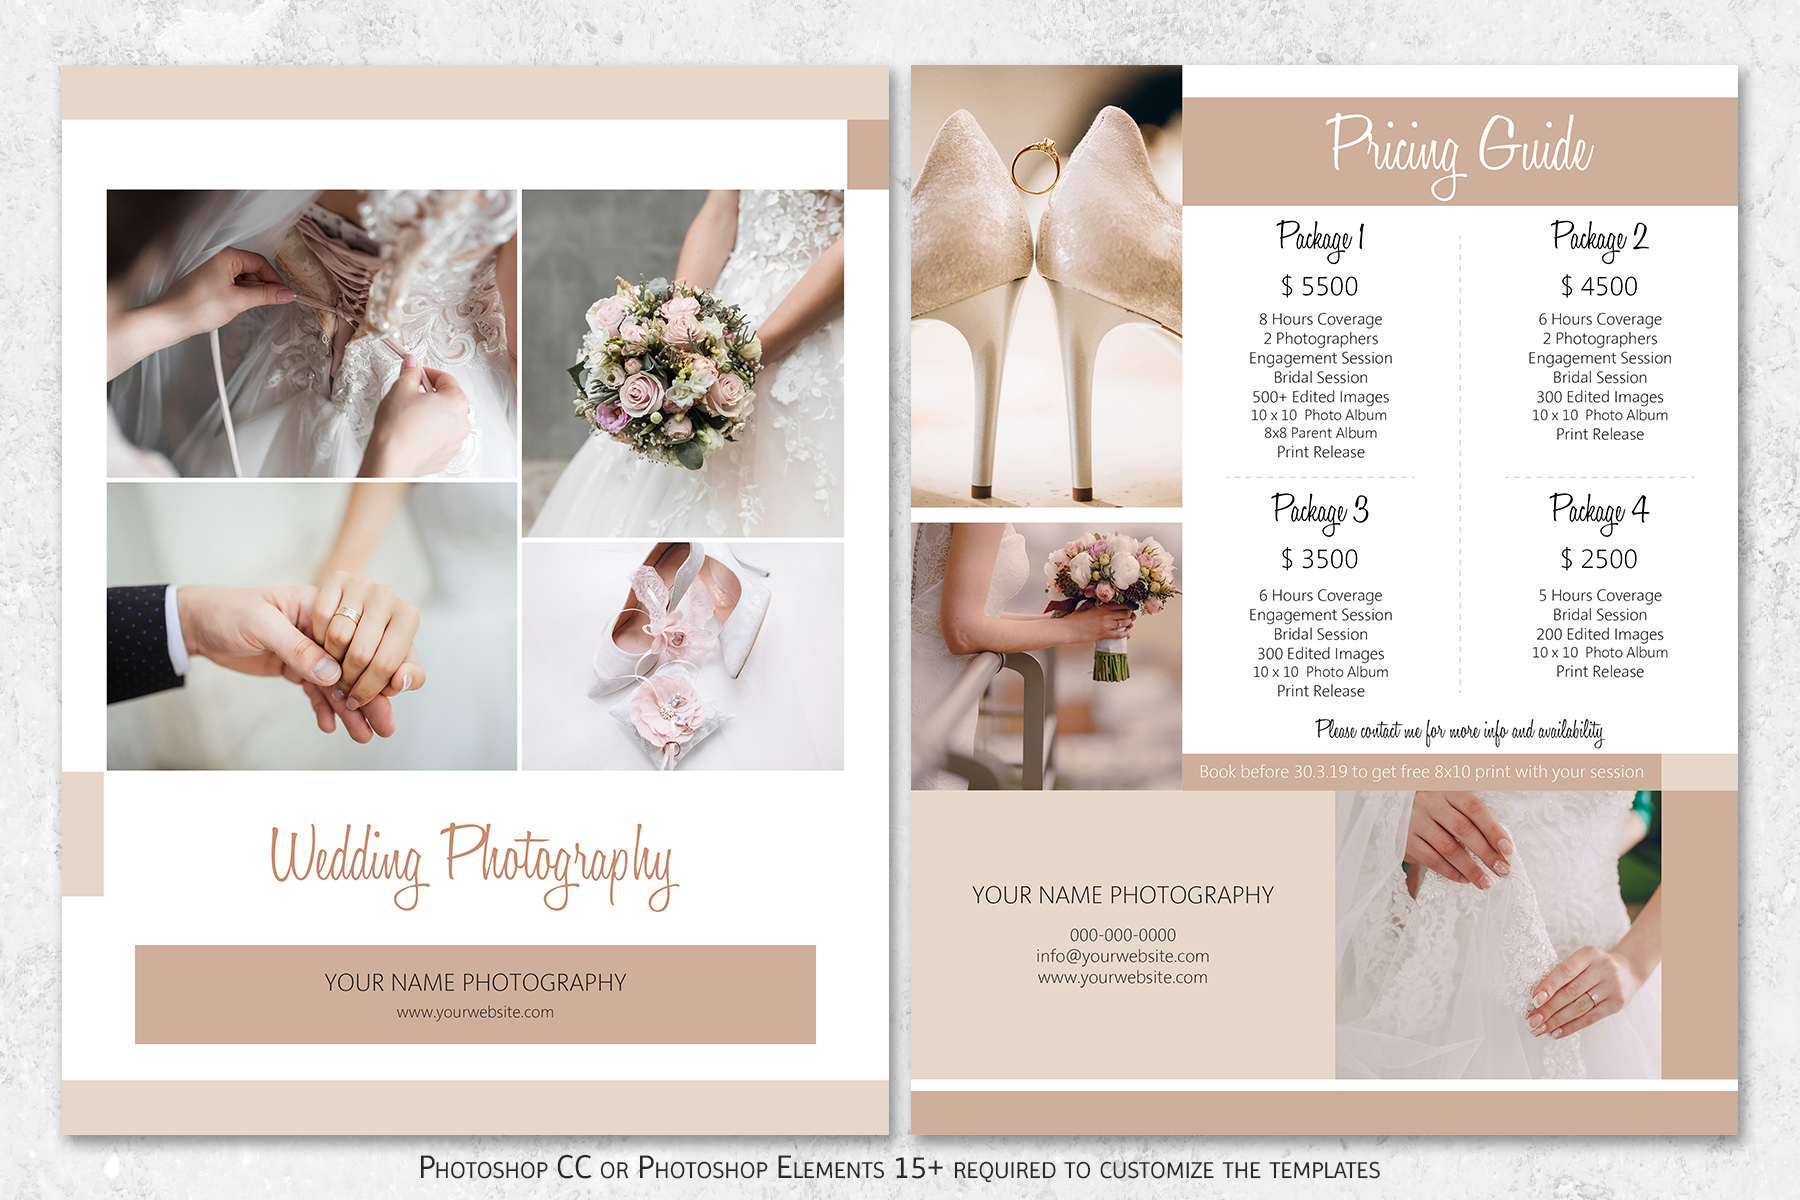 Wedding Photographer Pricing Guide Template